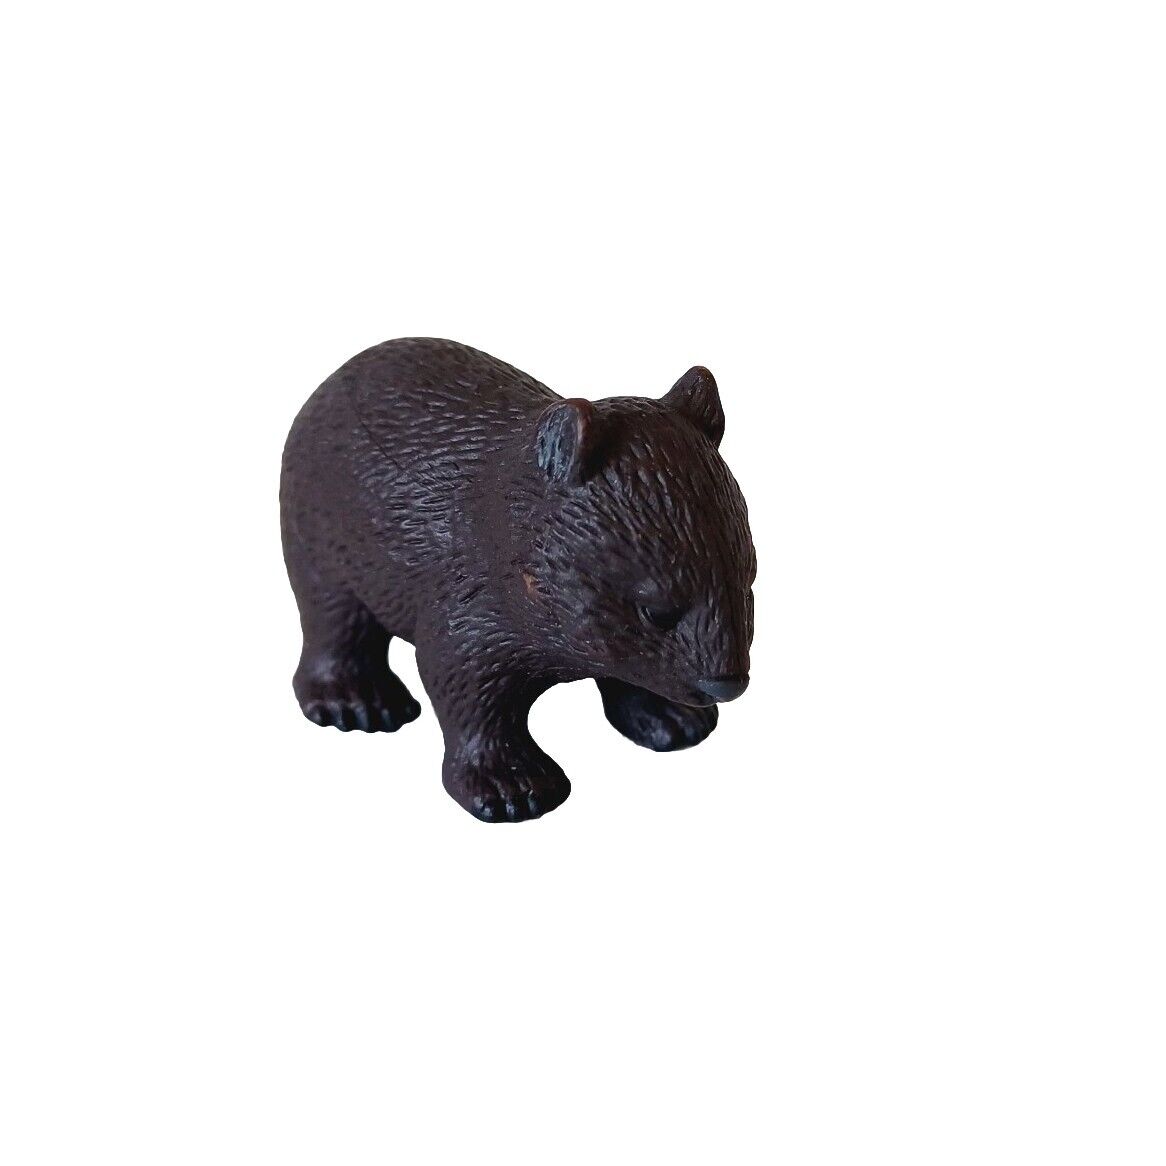 Science & Nature Australian Wombat Small - Toy Model